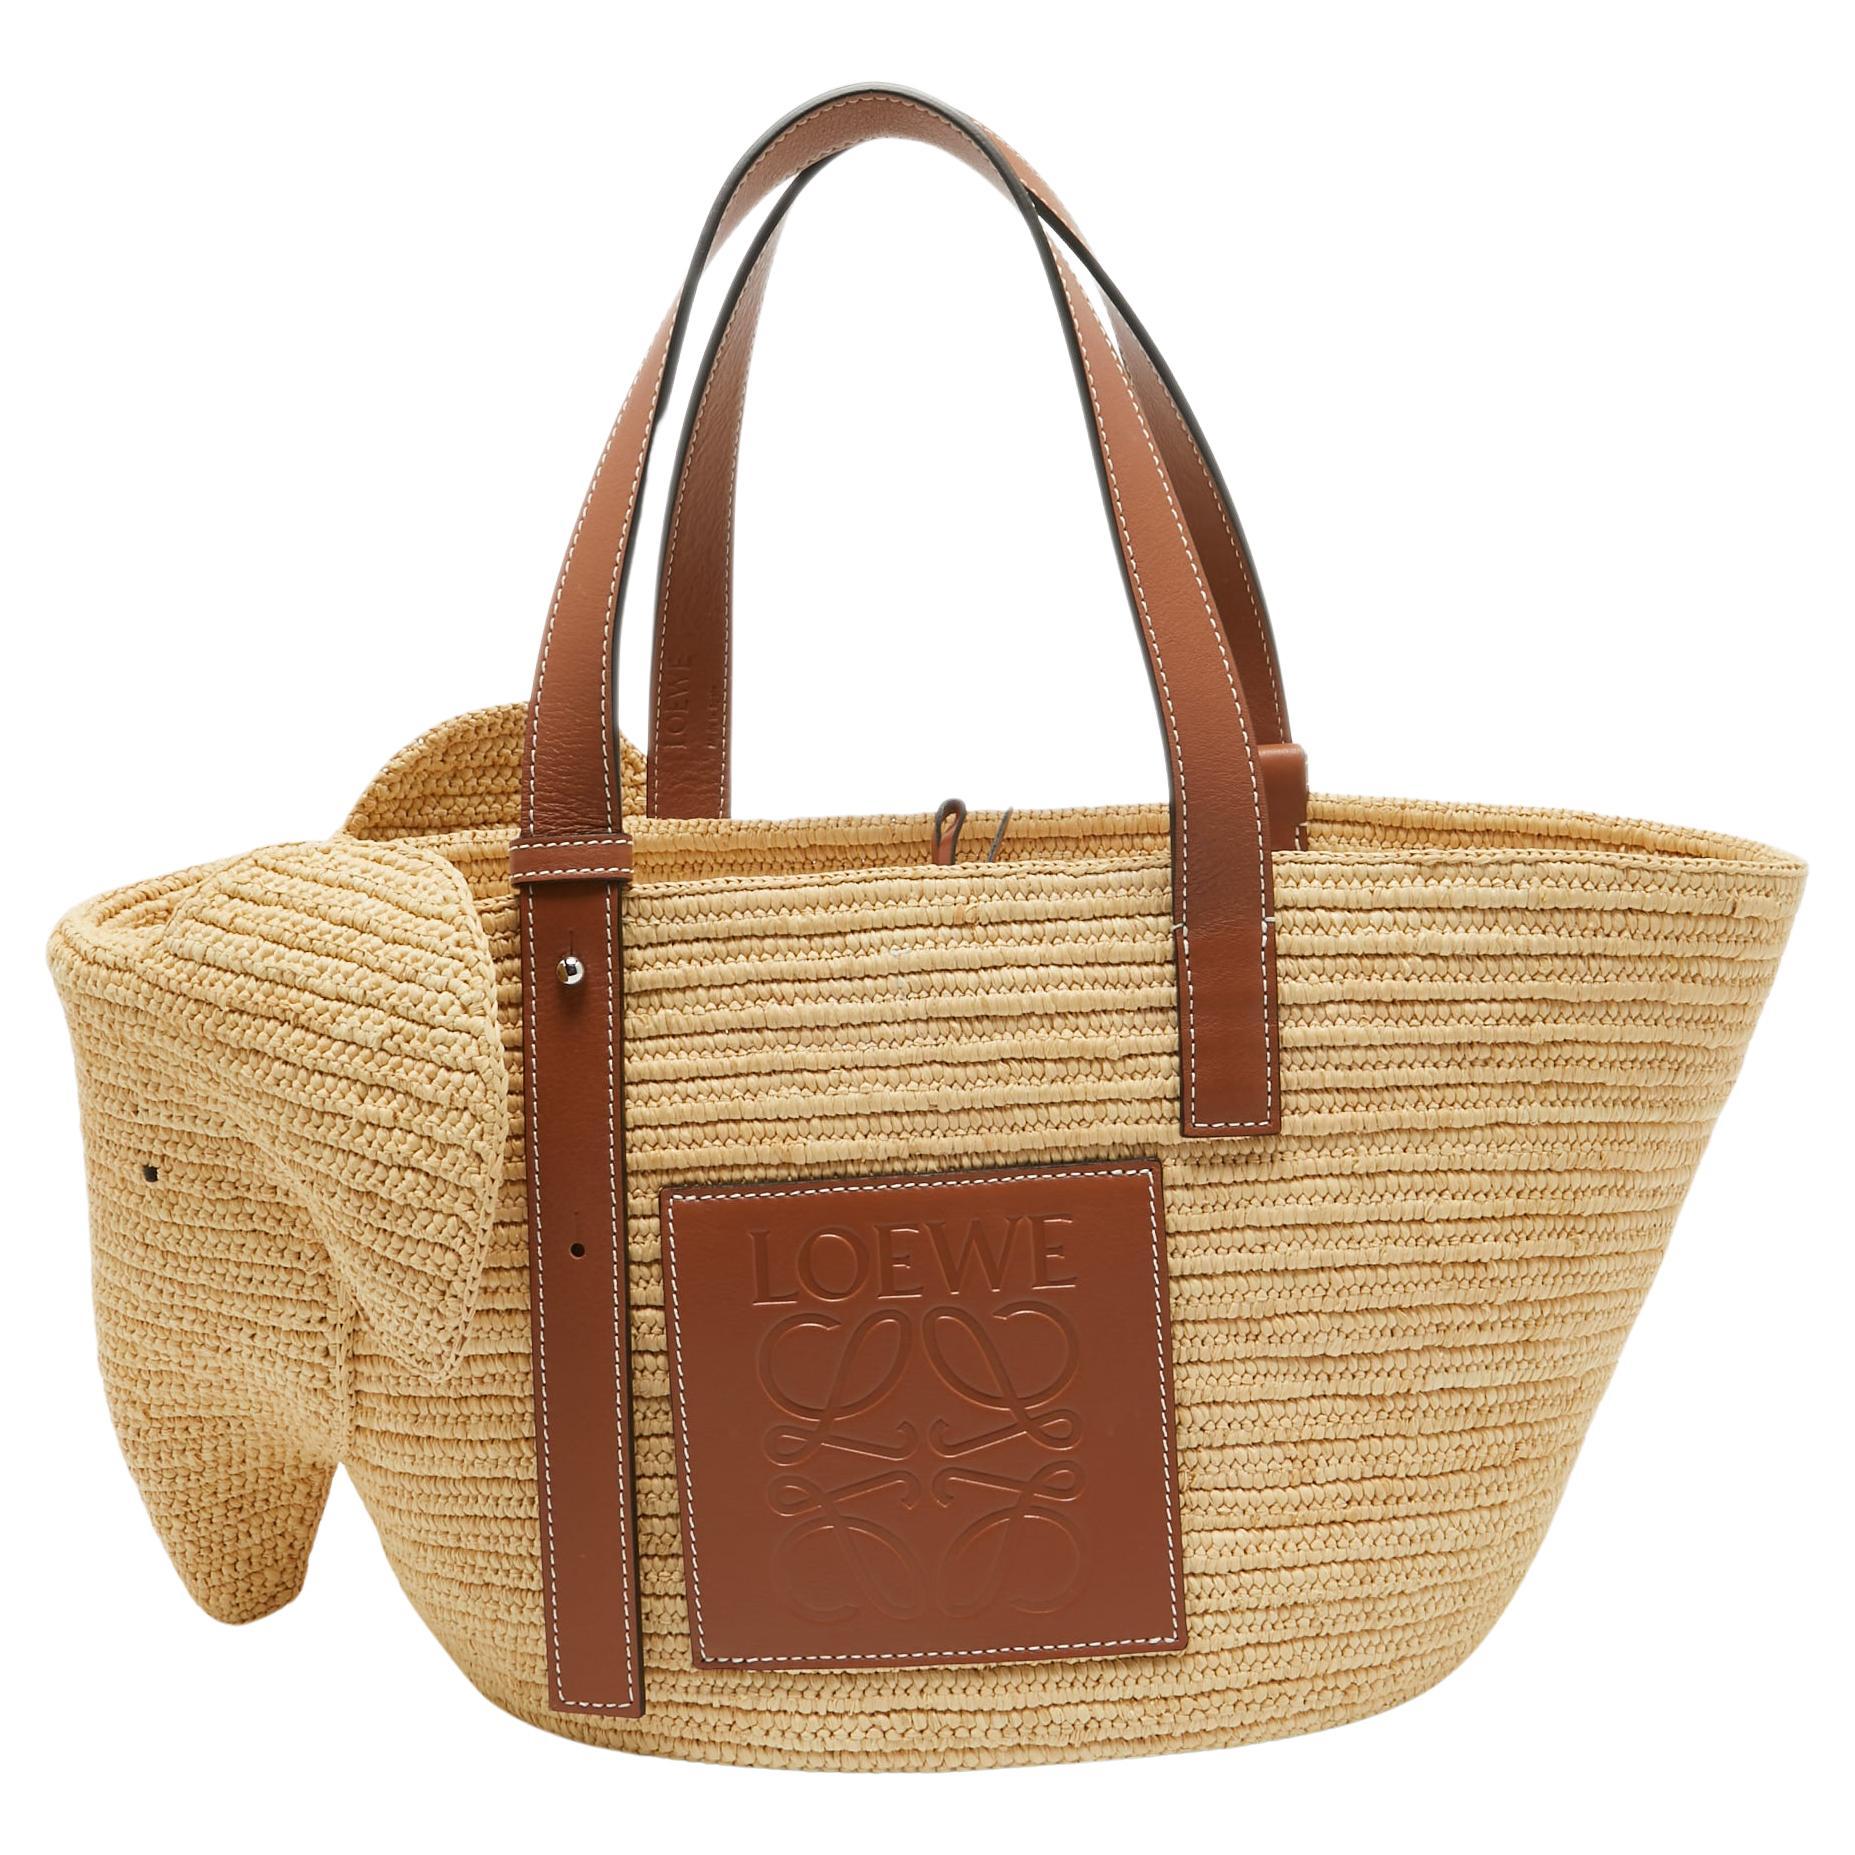 Loewe Brown/Natural Palm Leaf and Leather Elephant Basket Tote